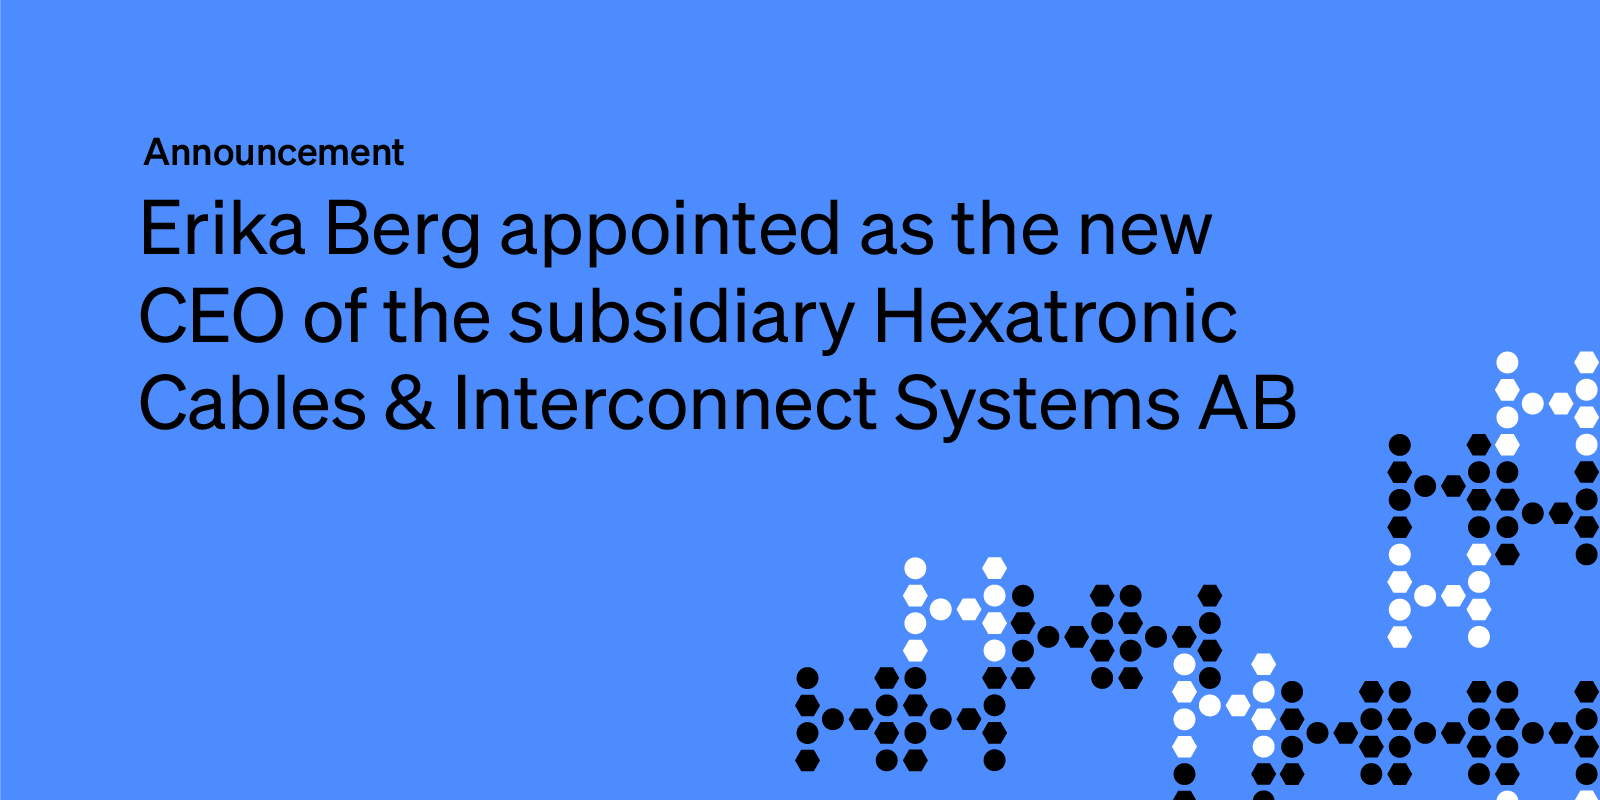 Erika Berg appointed as the new CEO of the subsidiary Hexatronic Cables & Interconnect Systems AB